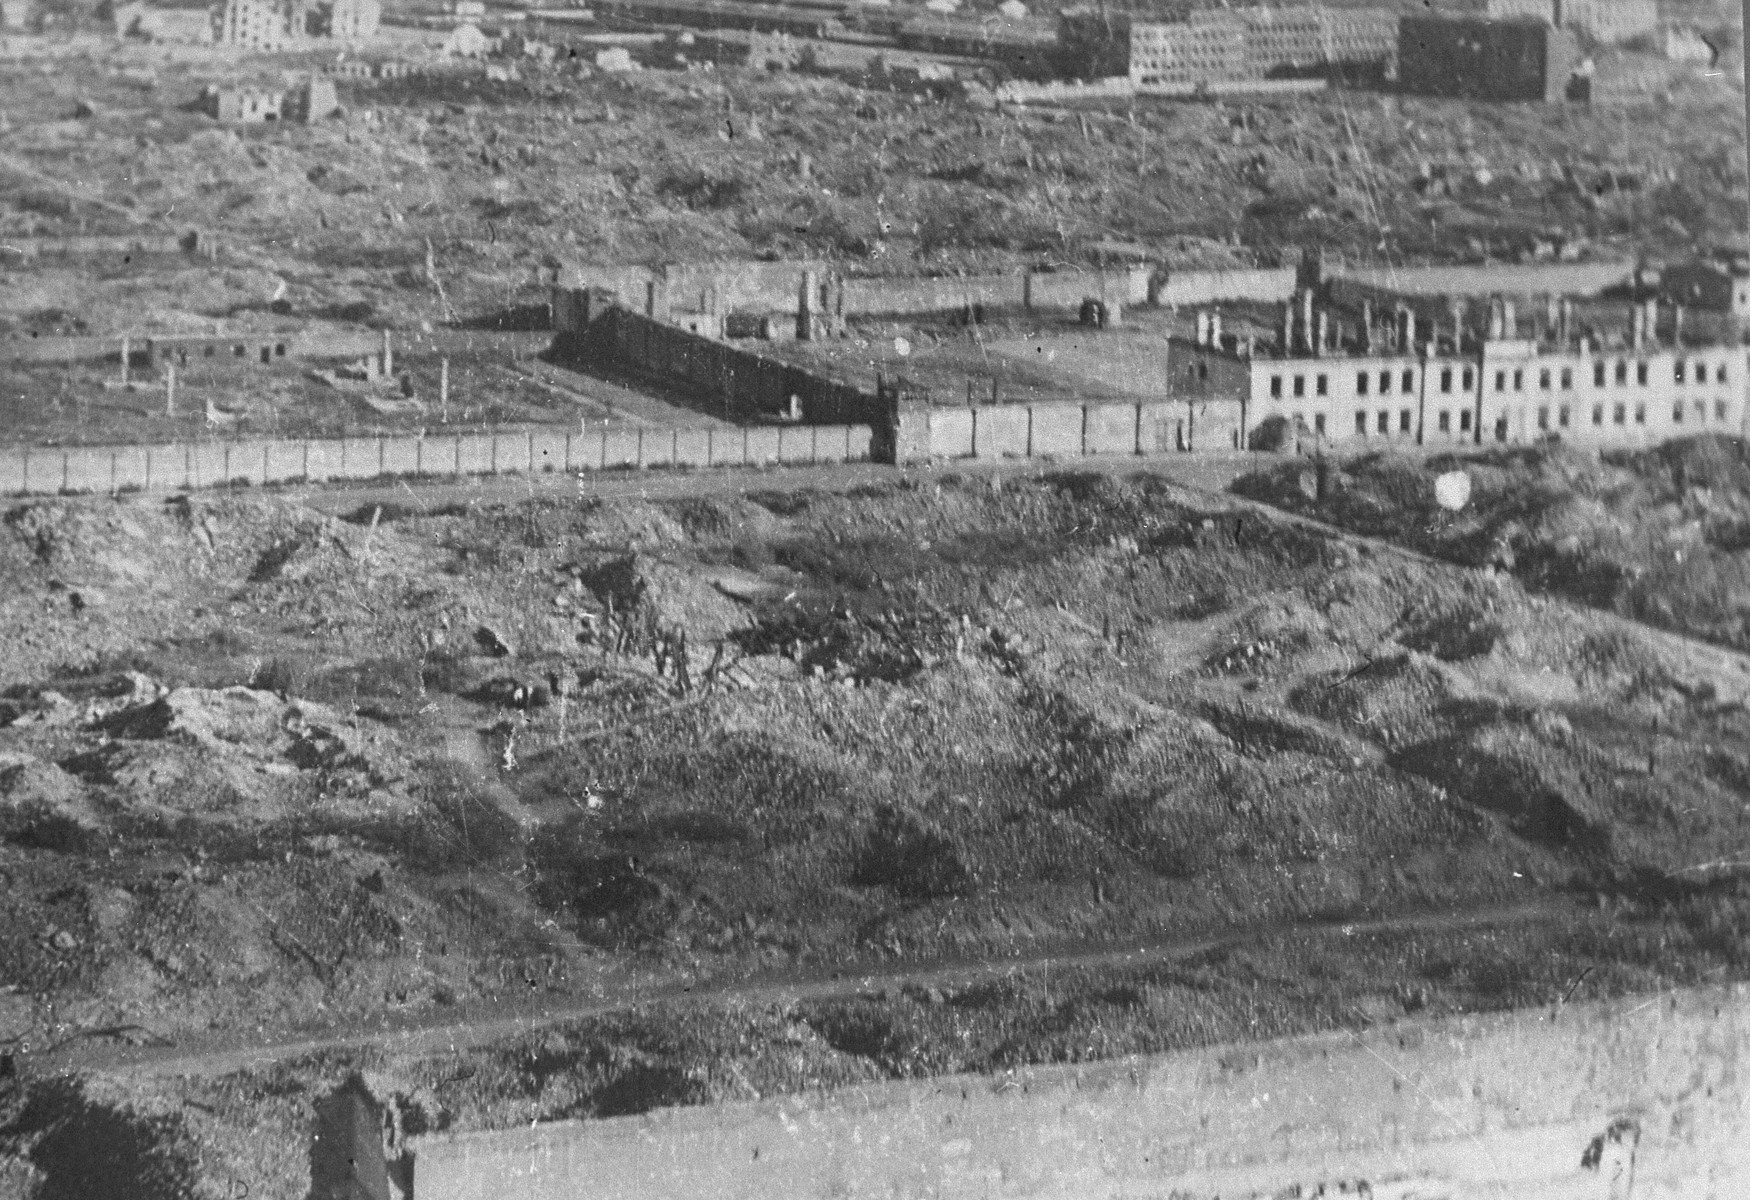 View of the ruins of the Warsaw ghetto.  

Pictured in the foreground are part of the wall of Pawiak prison and ruins of buildings and warehouses on Stawki Street.